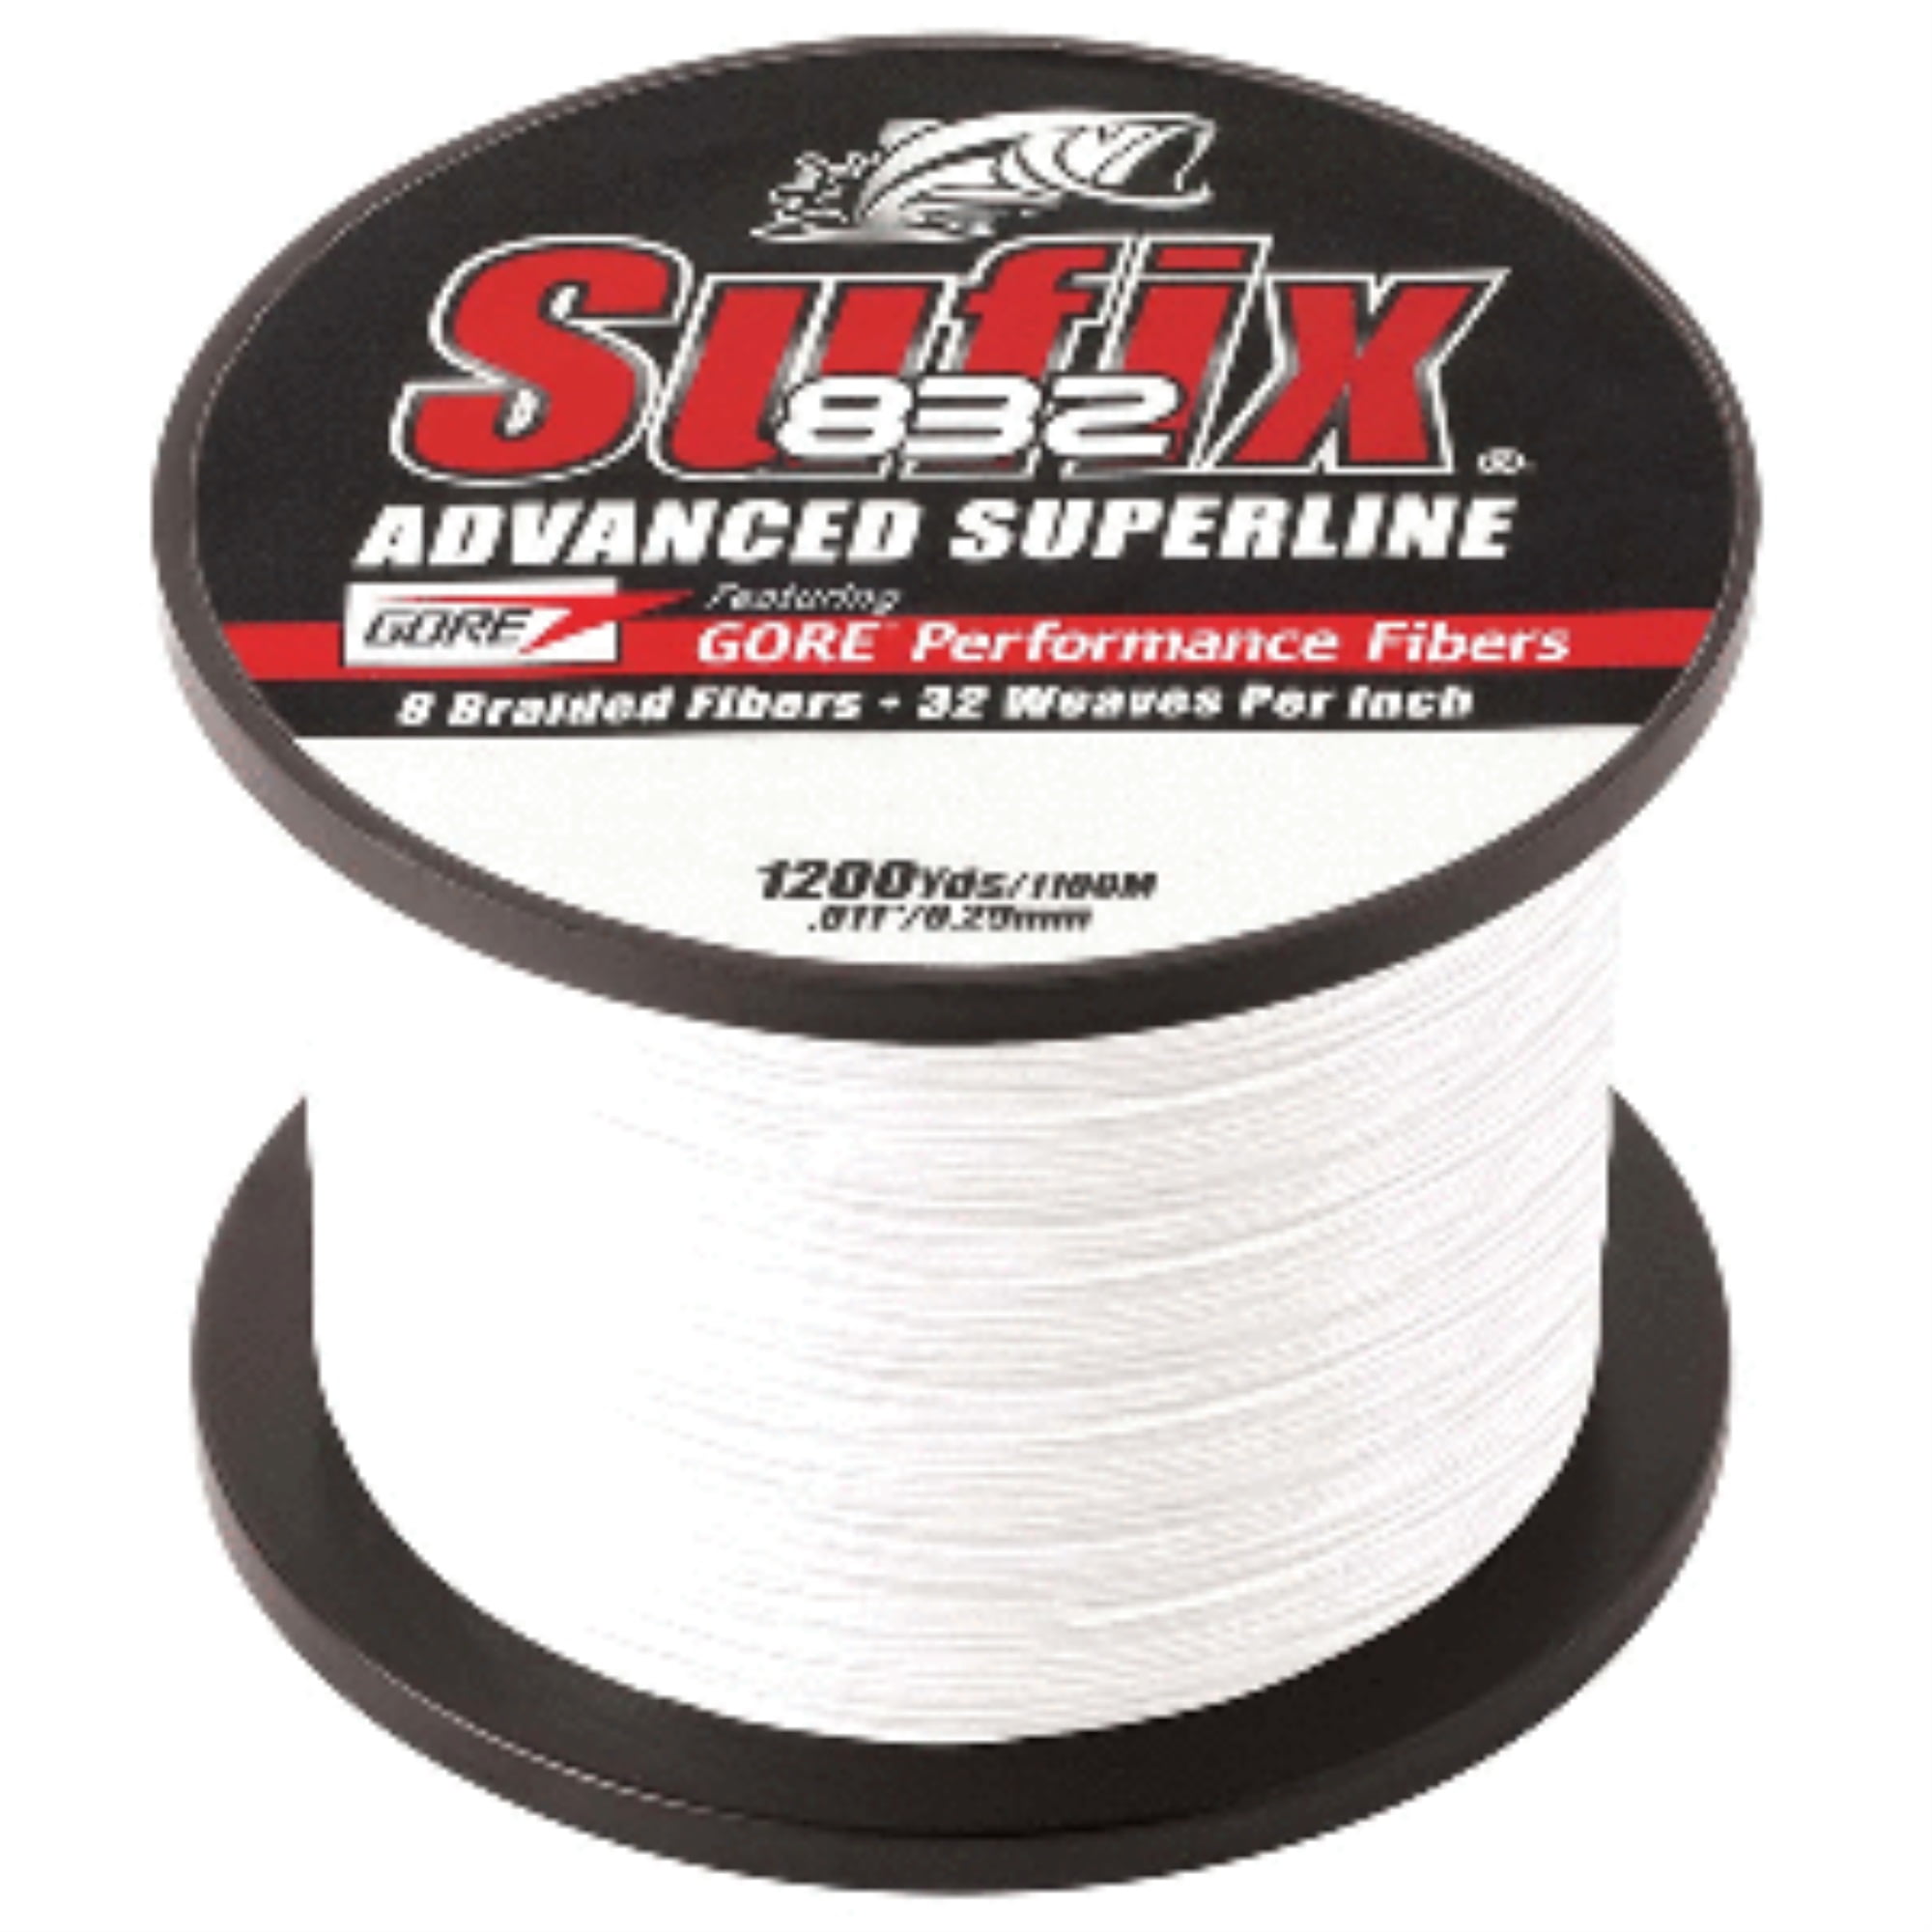 Meefah Tackle】 SUFIX 832 Advance Superline Multicolor 300M - Braided  Fishing Line Tali Pancing